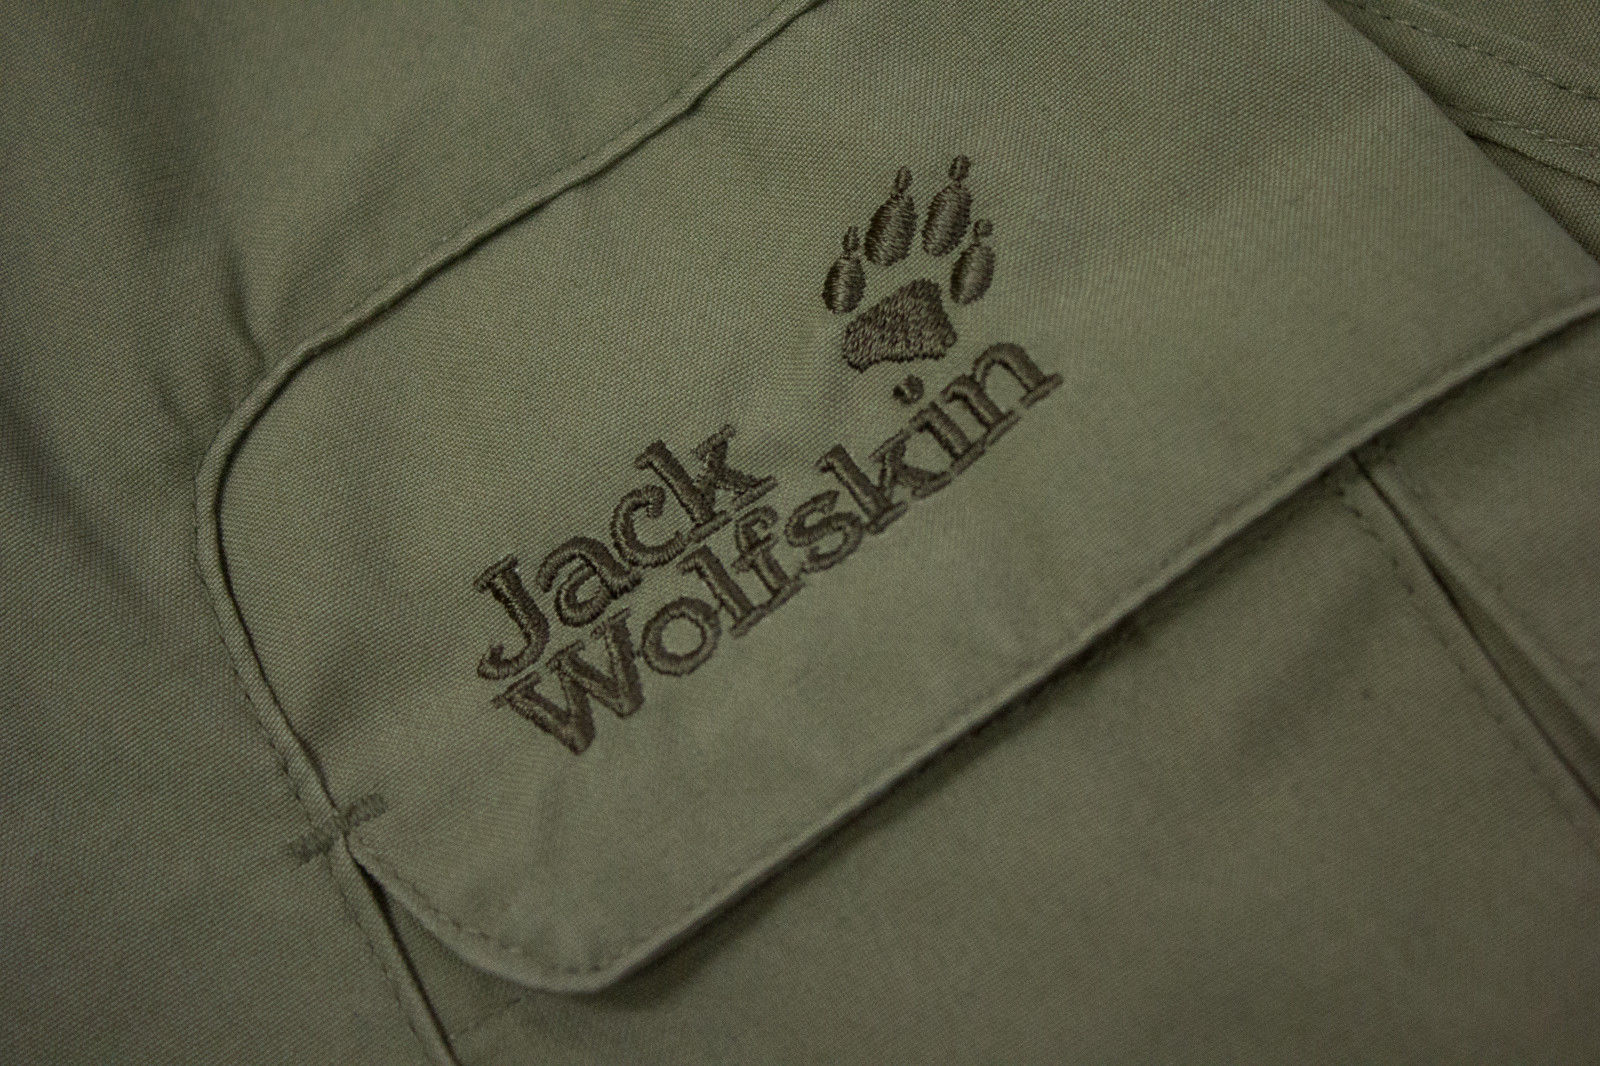 Jack Wolfskin Nano Tex Hiking/Outdoor Pants, XL - secondfirst